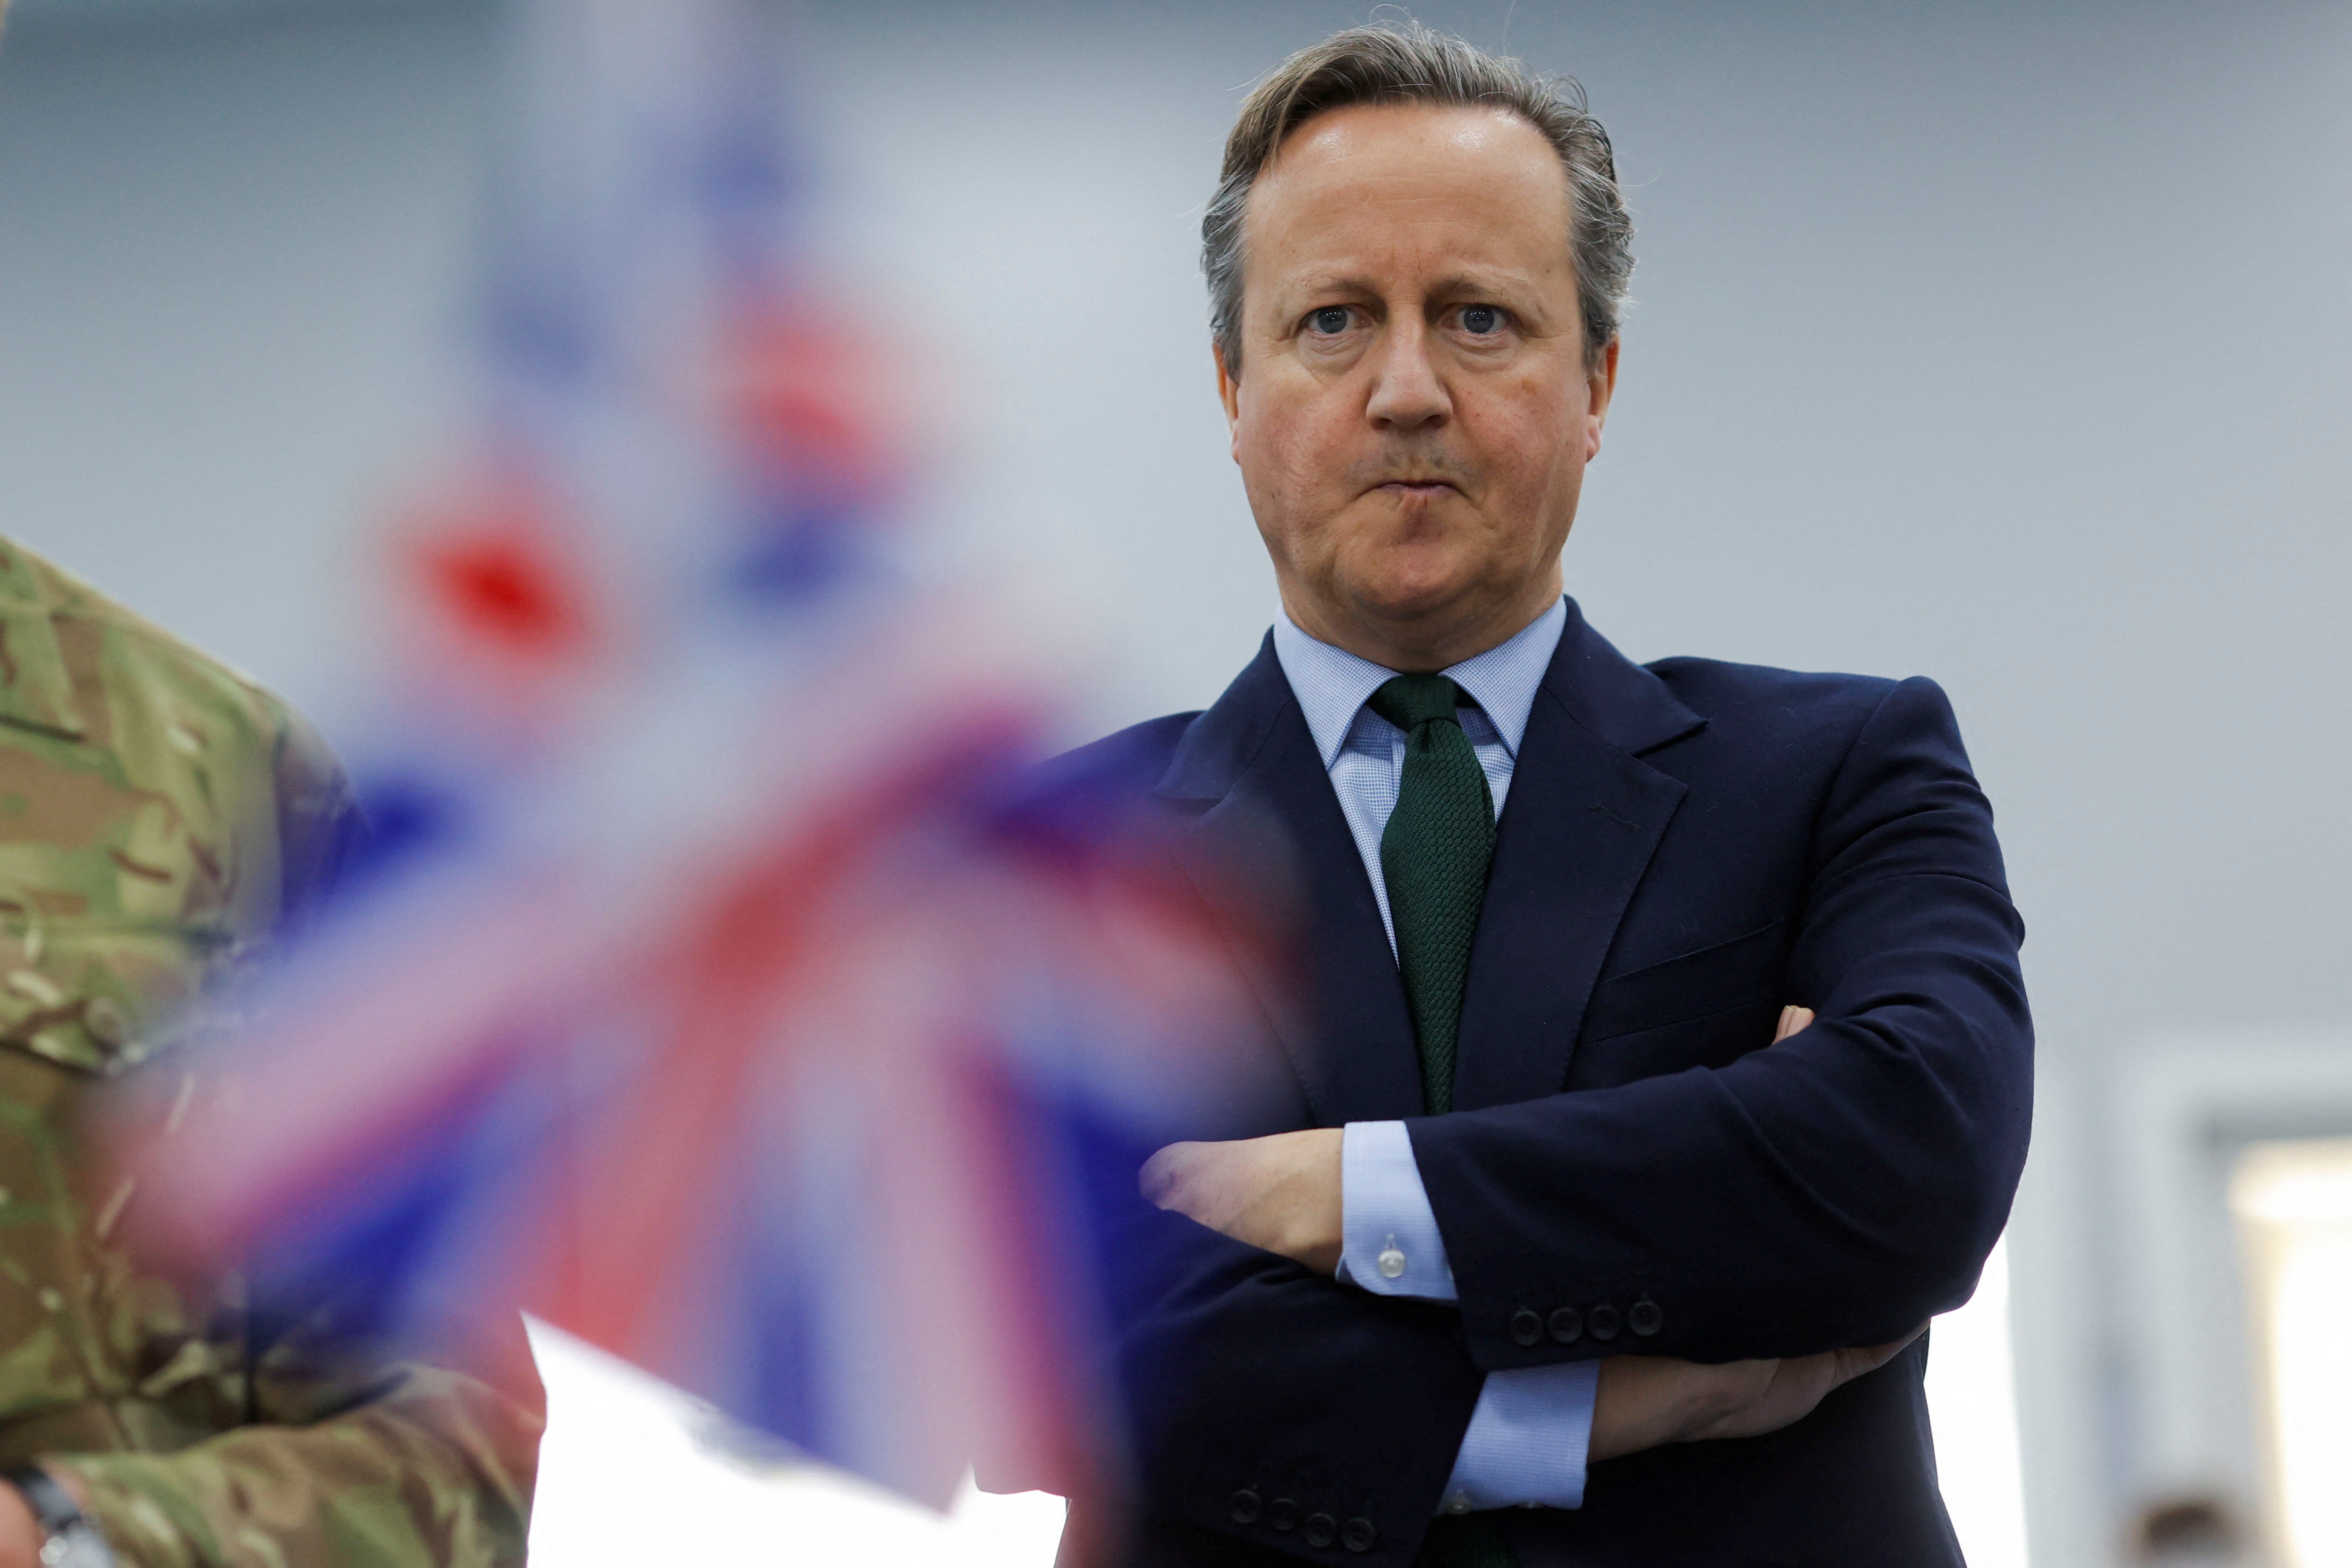 Lord Cameron said the Foreign Office had started evacuating Afghans from Pakistan to the UK